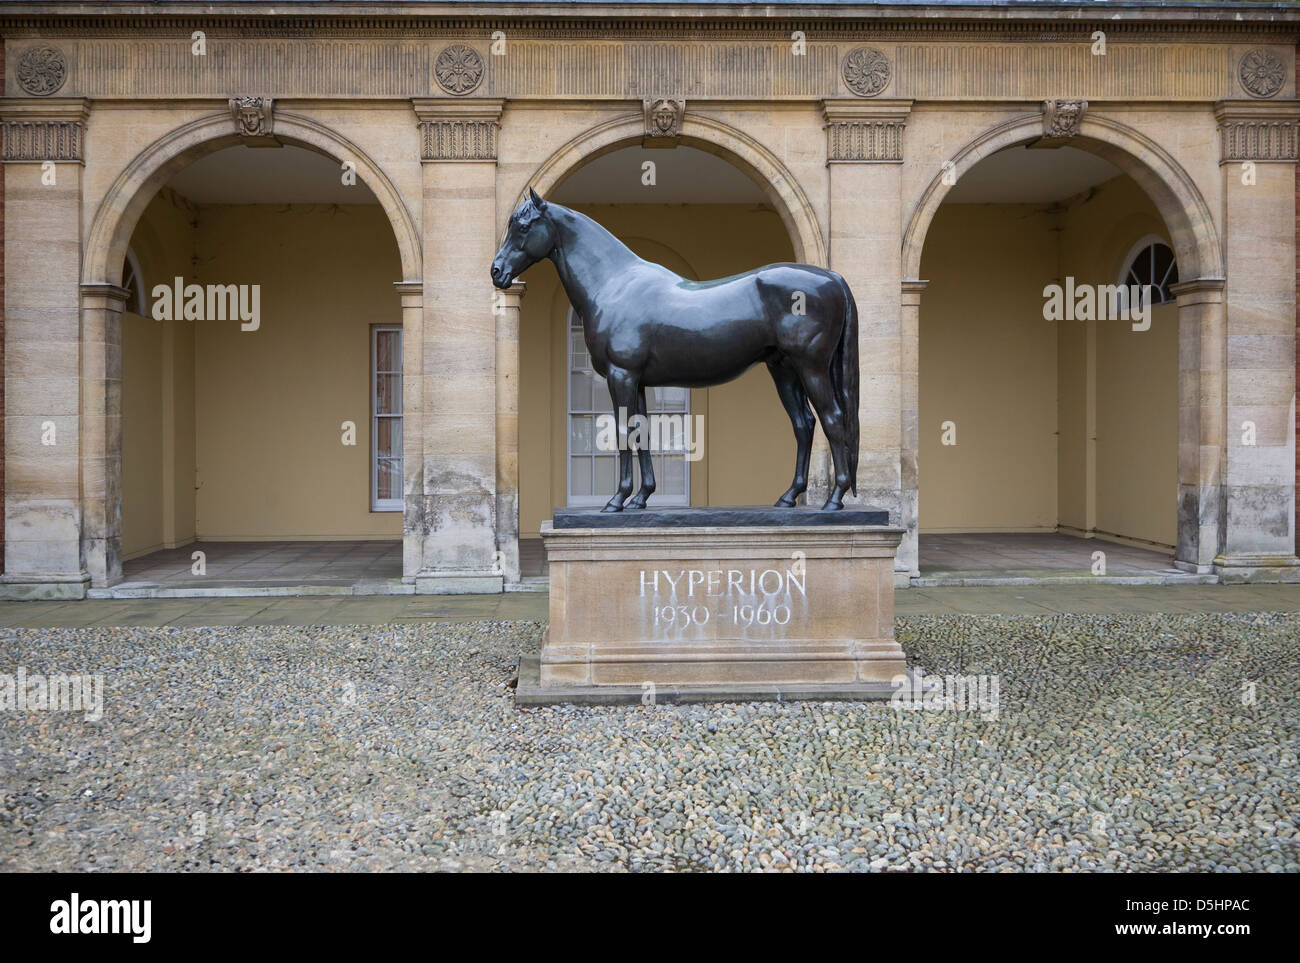 Statue of horse Hyperion at the National Horseracing Museum, Newmarket, Suffolk, England Stock Photo